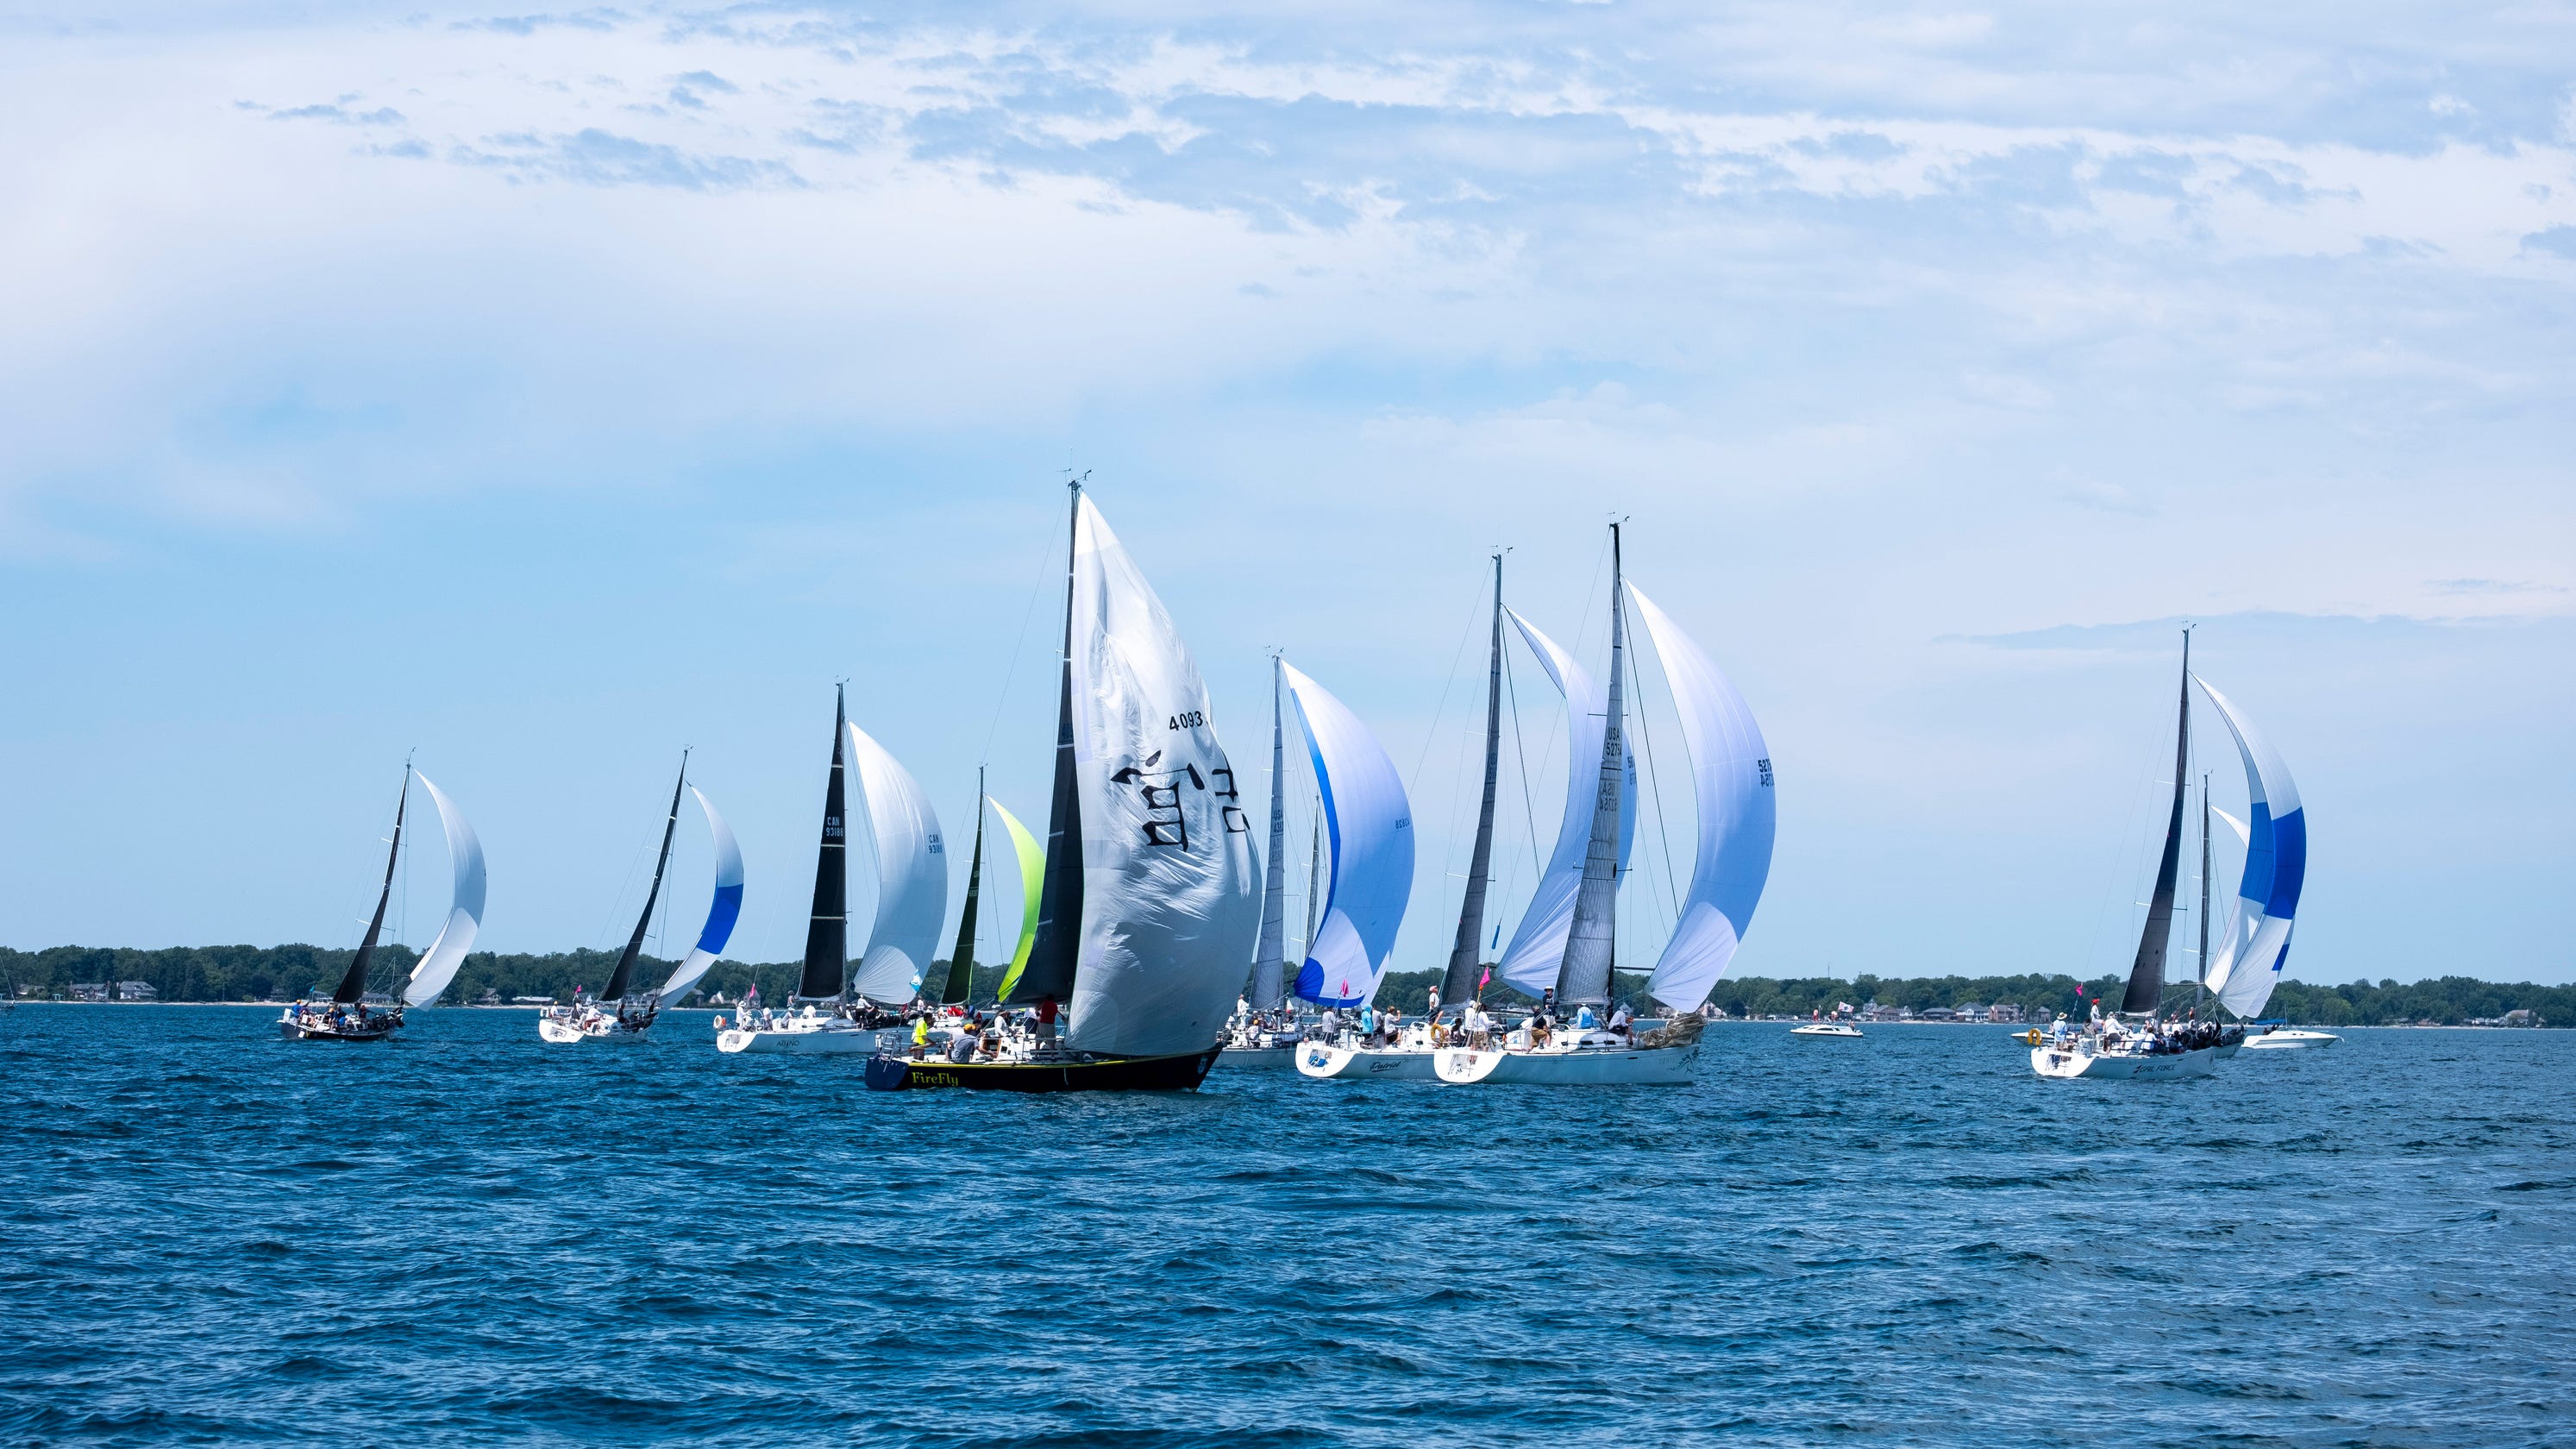 sailboat race from port huron to mackinac